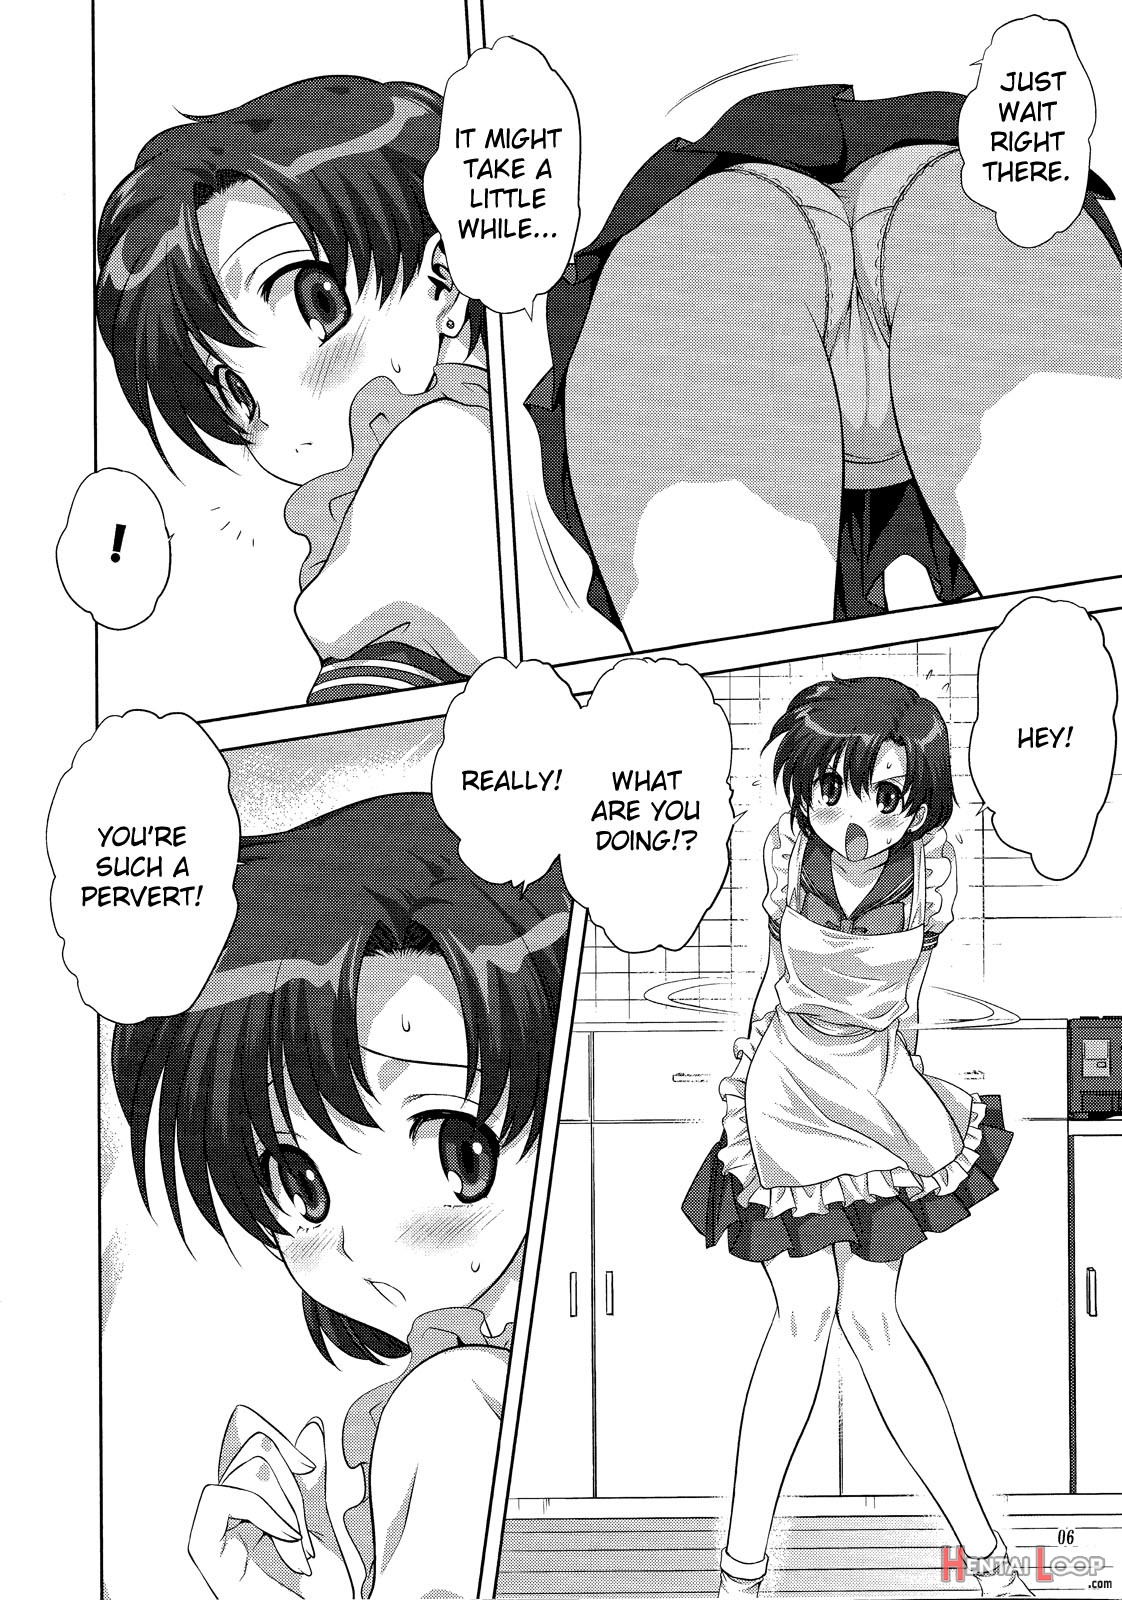 Together With Ami page 5